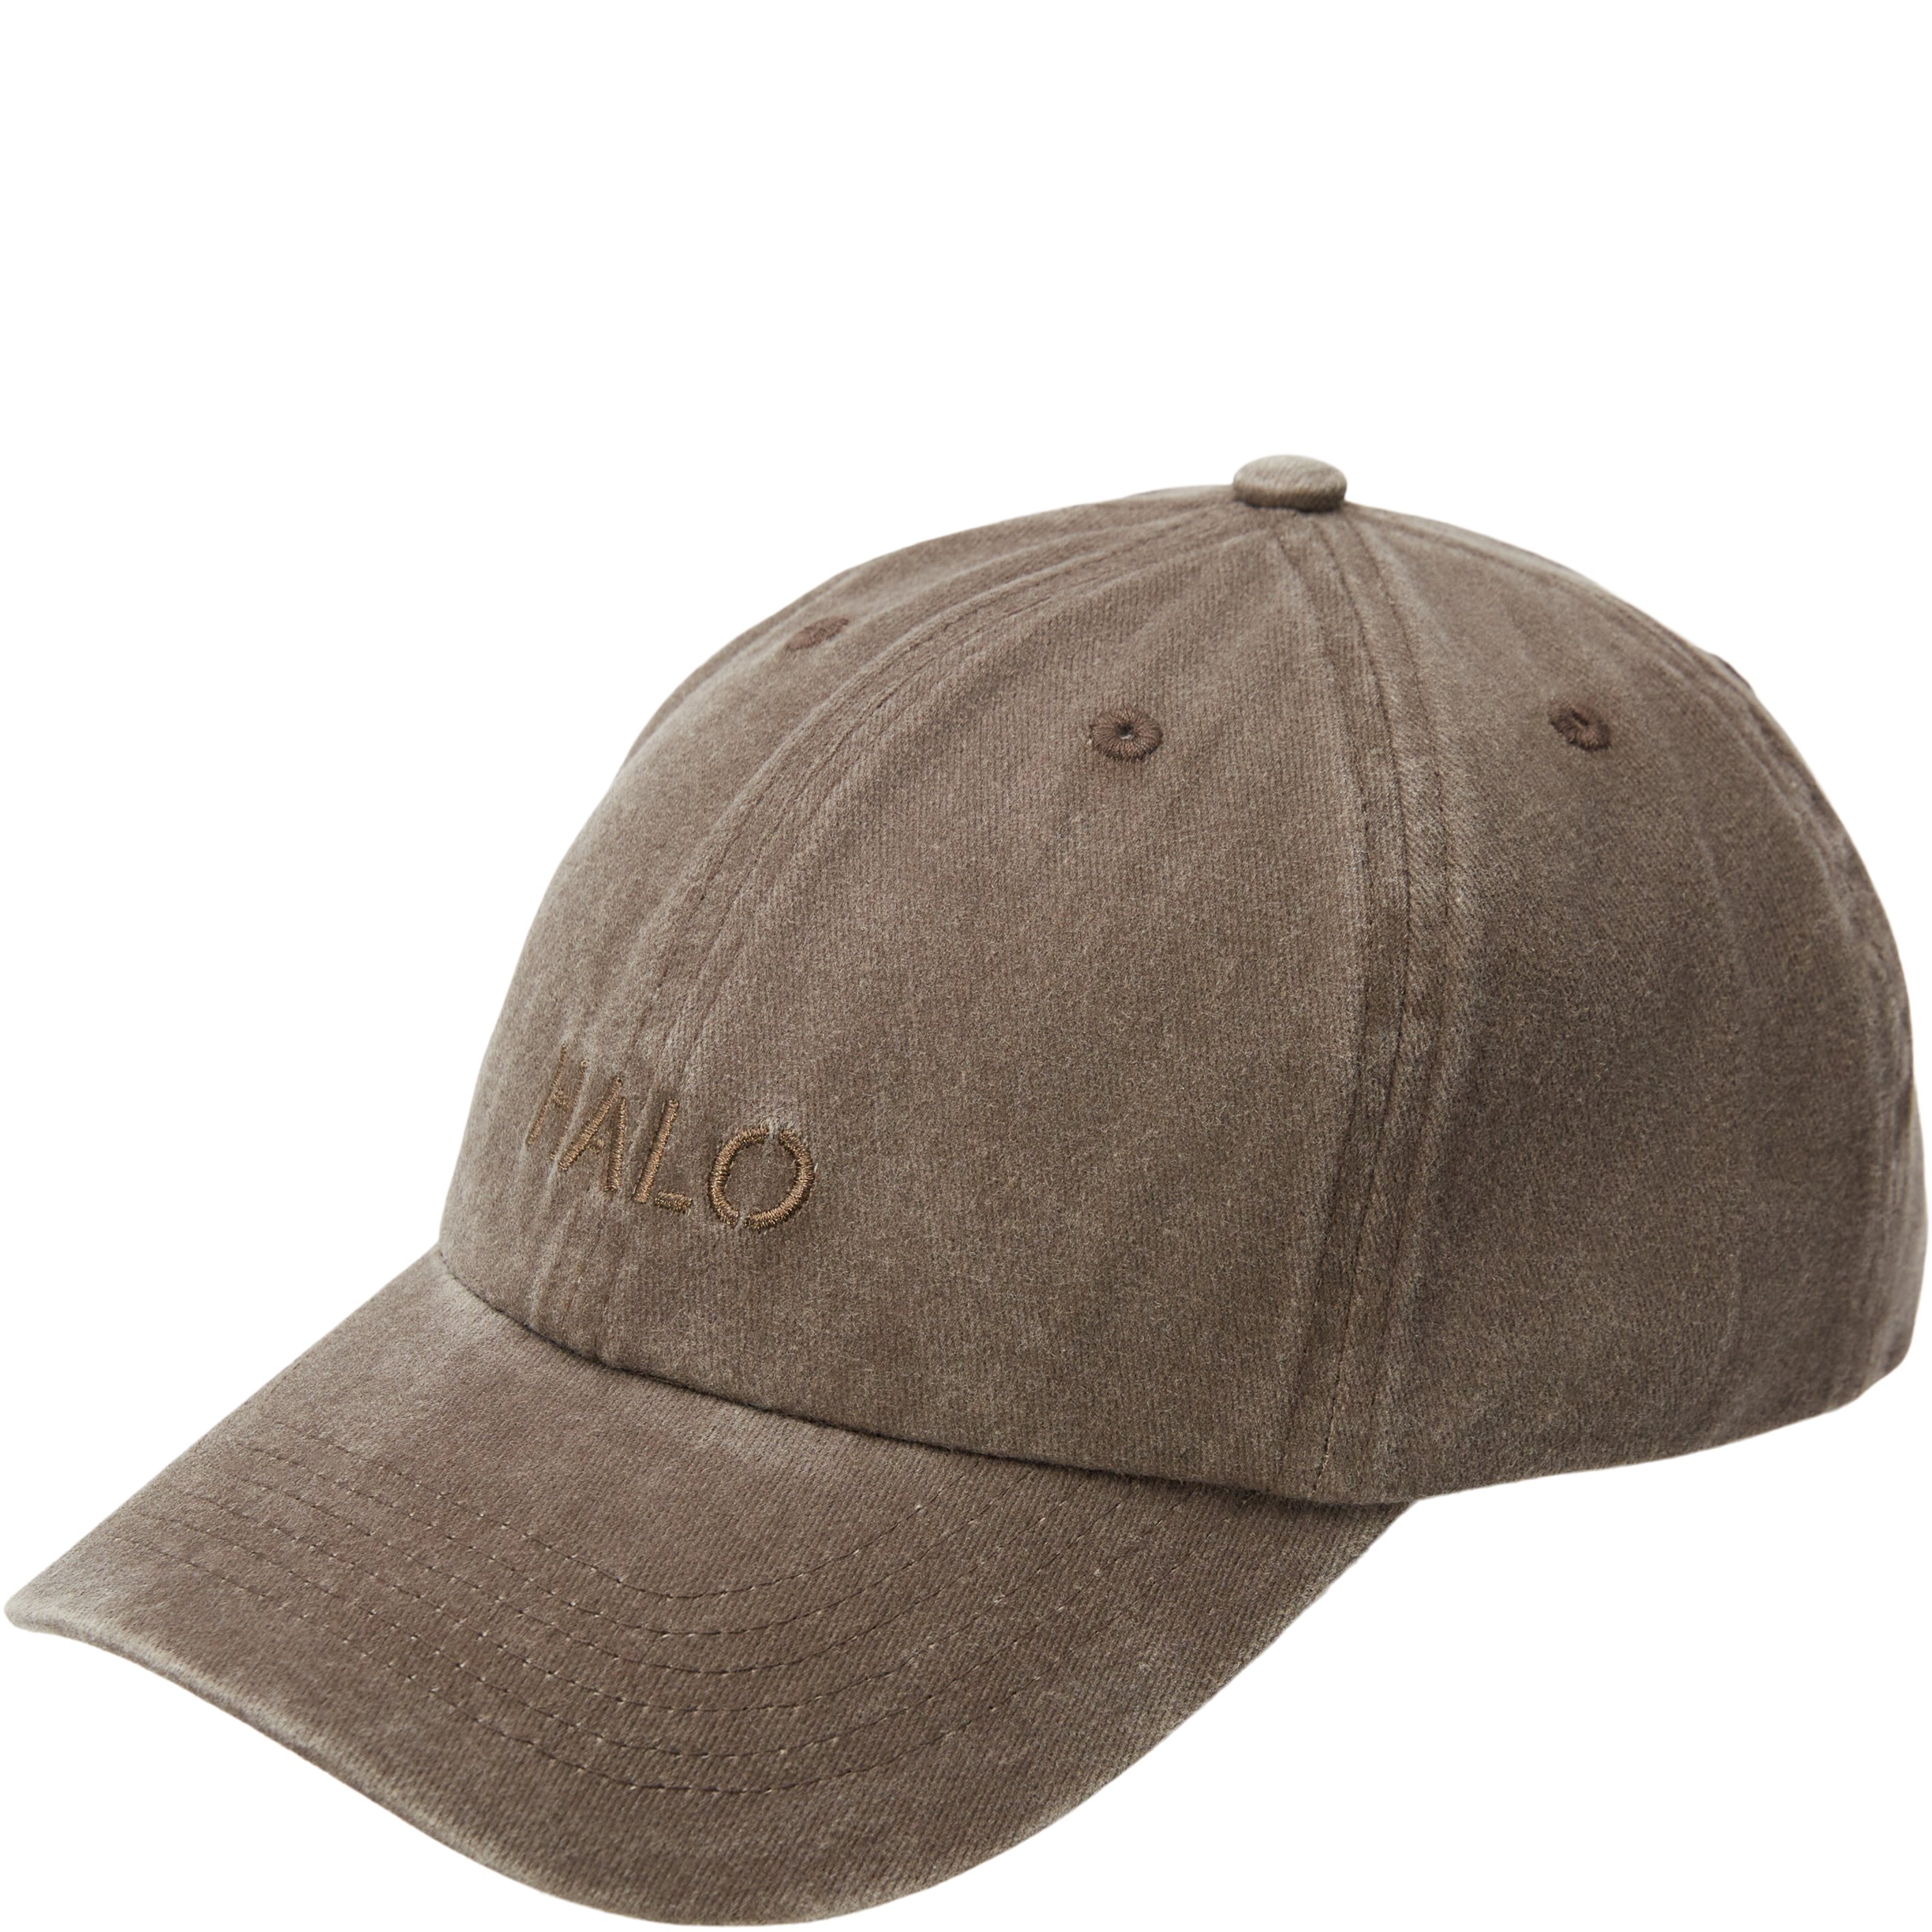 HALO Caps WASHED CANVAS CAP 610461 Green